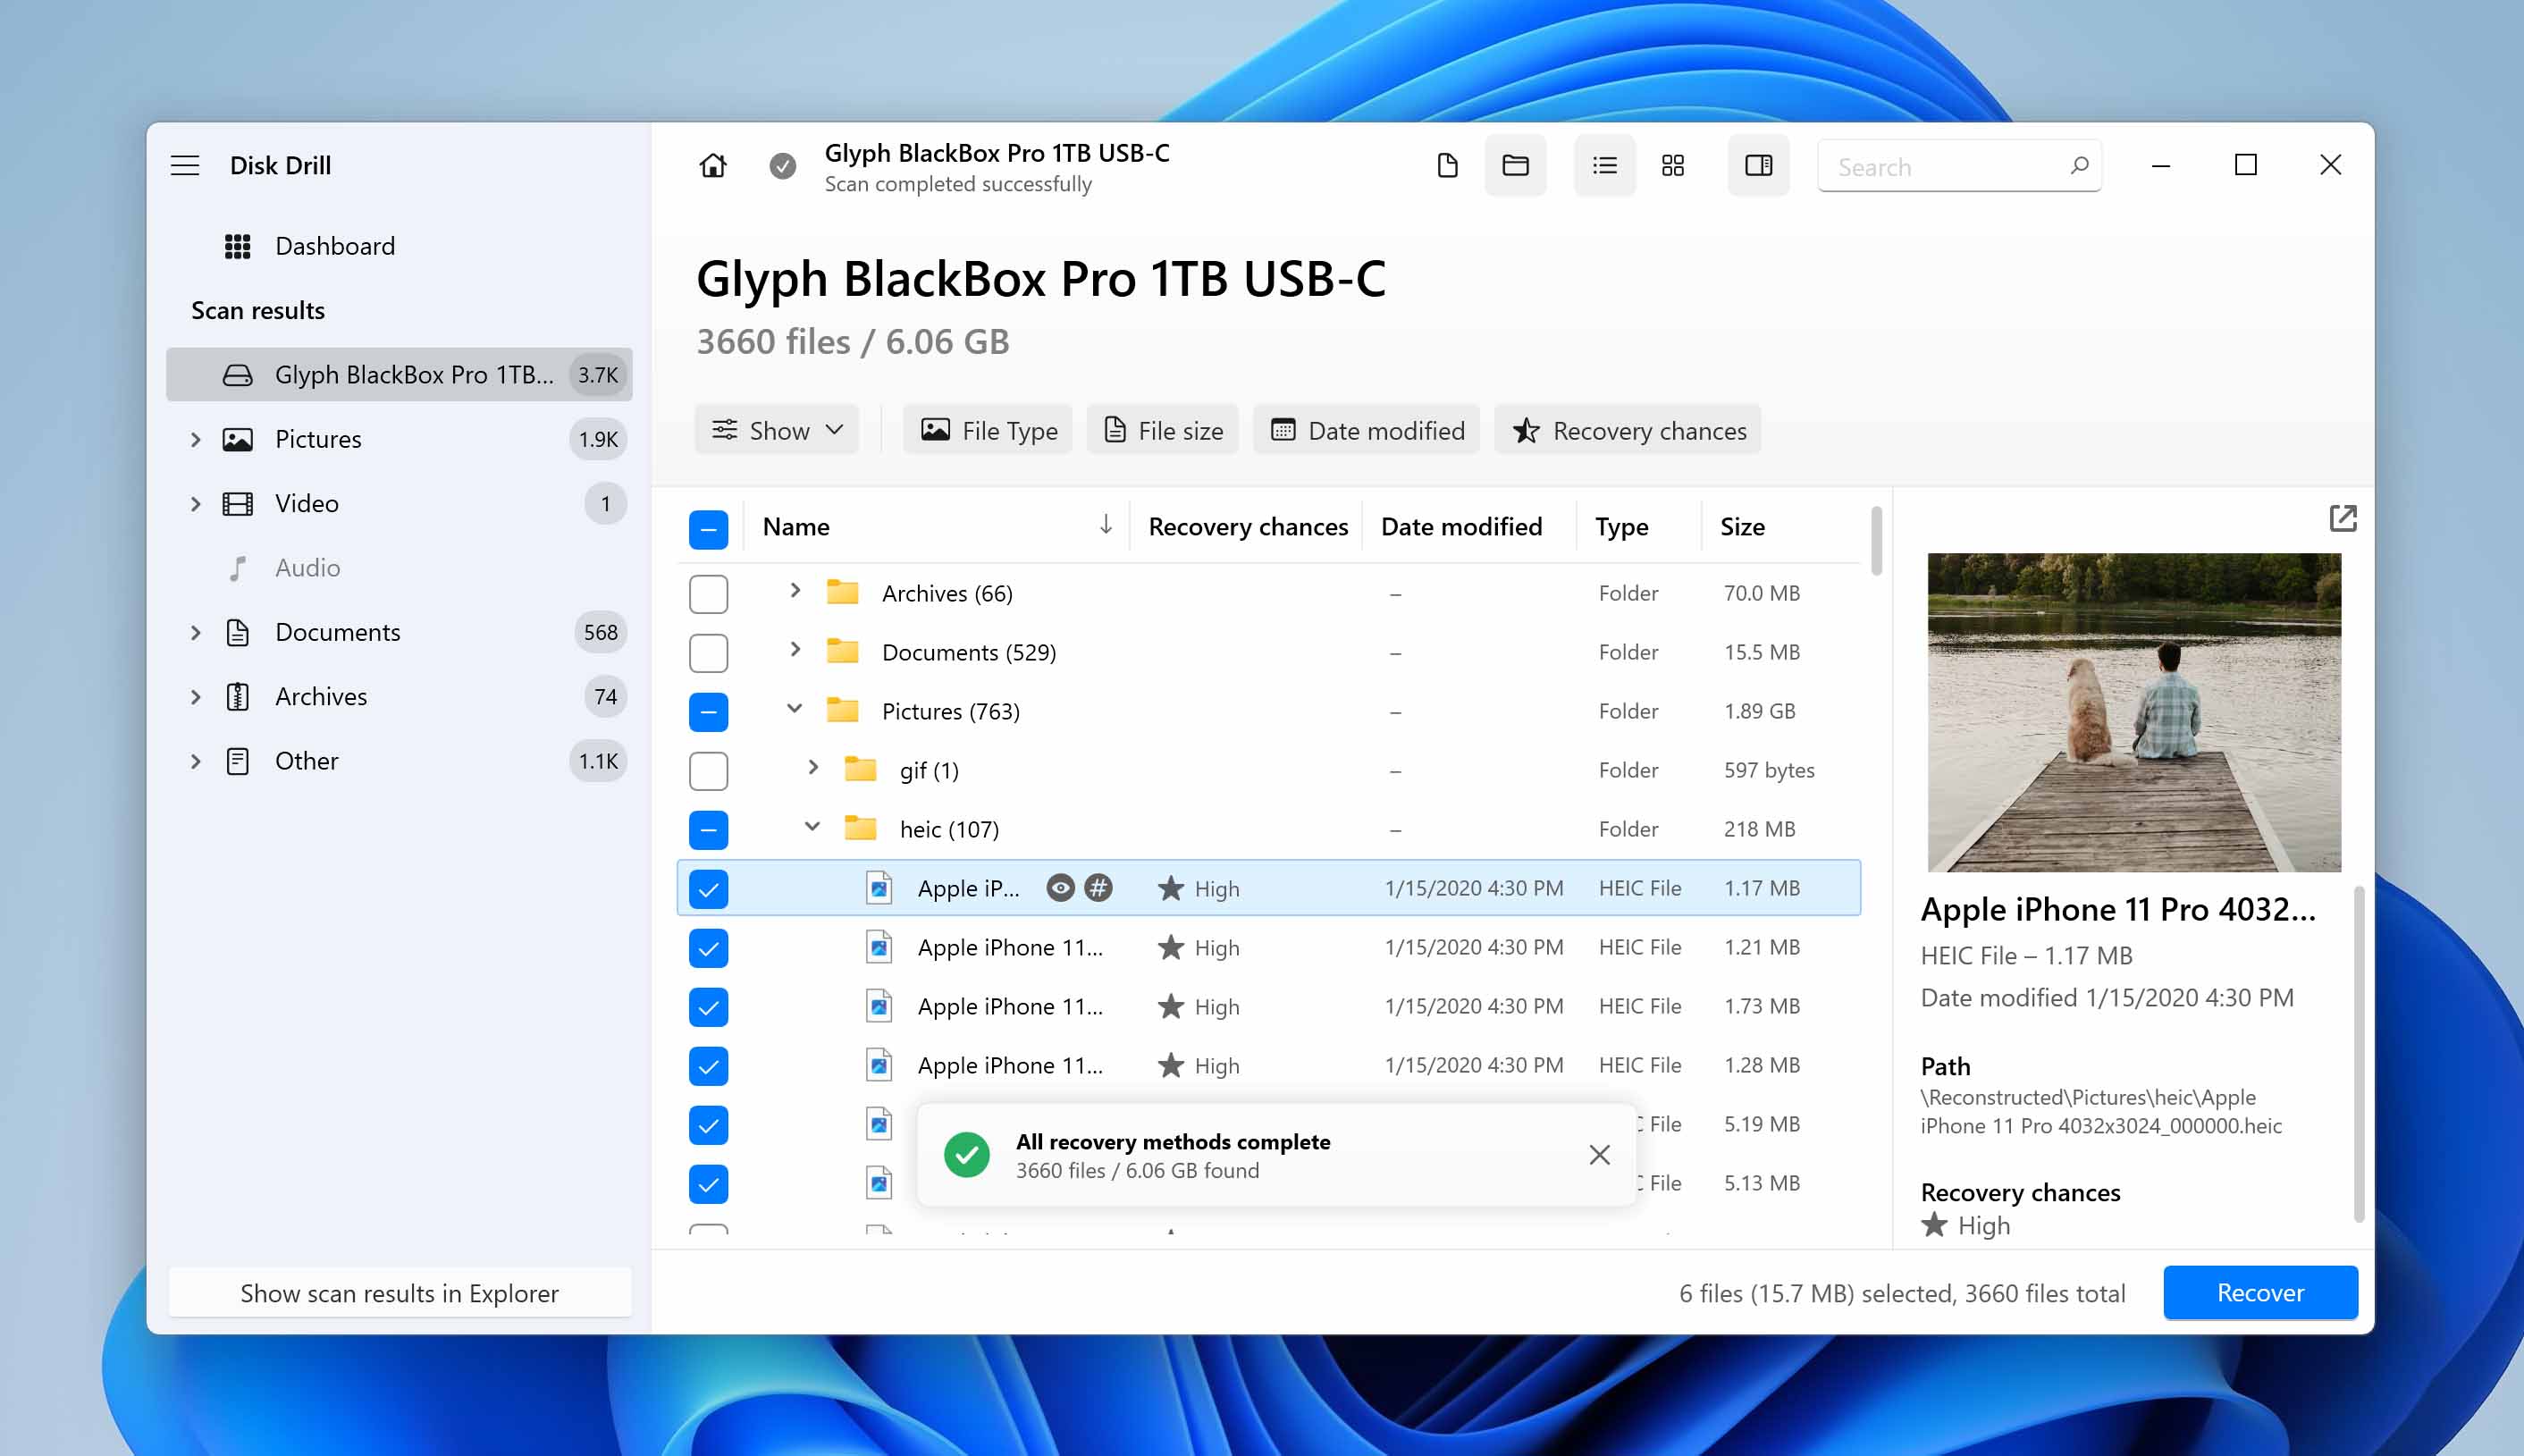 preview and select lost files from glyph blackbox pro